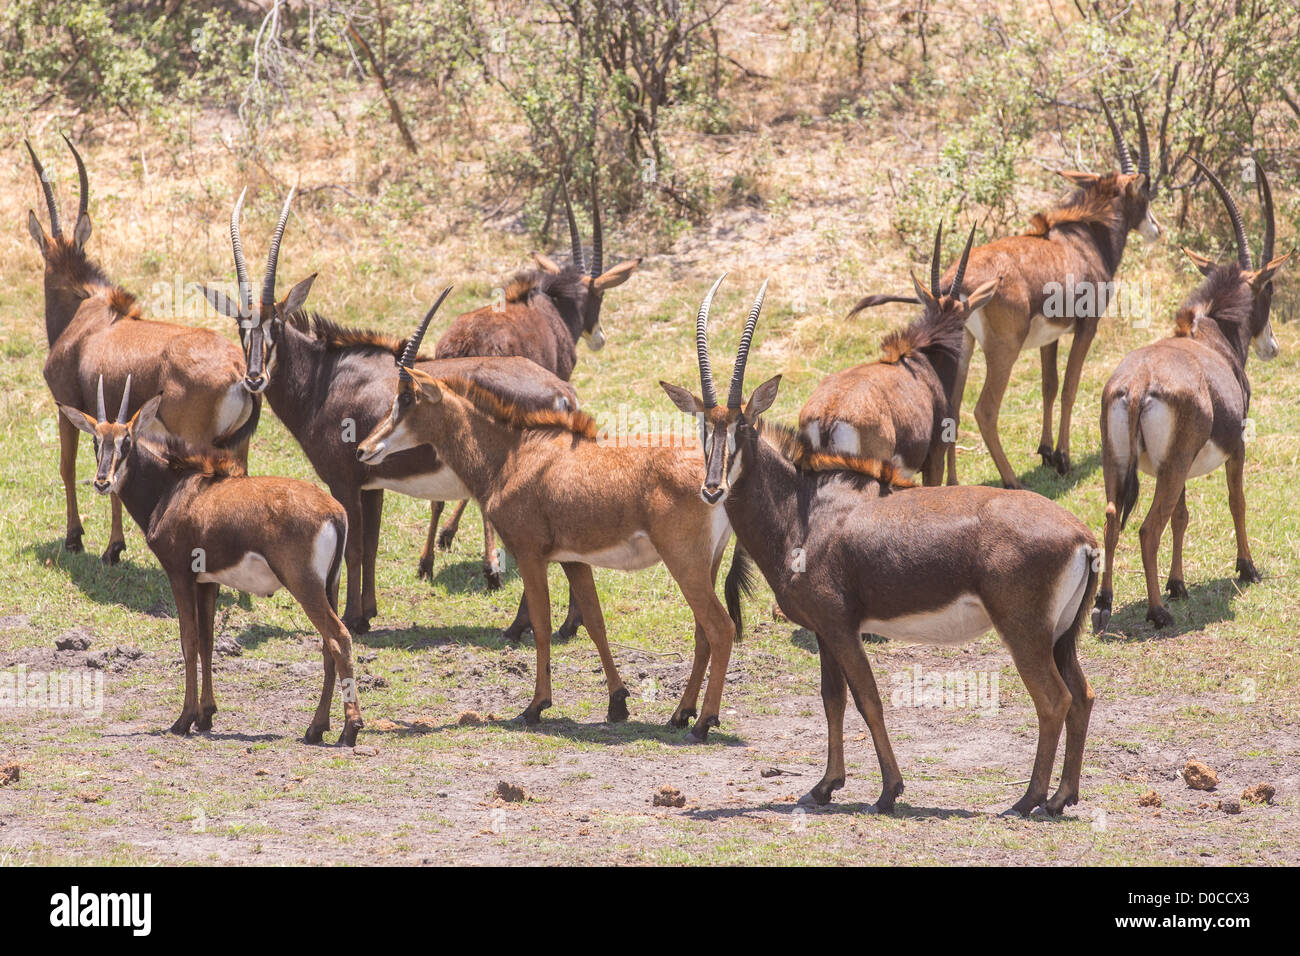 Sable antelope (Hippotragus niger) in the Babwata National Park, Namibia. Stock Photo